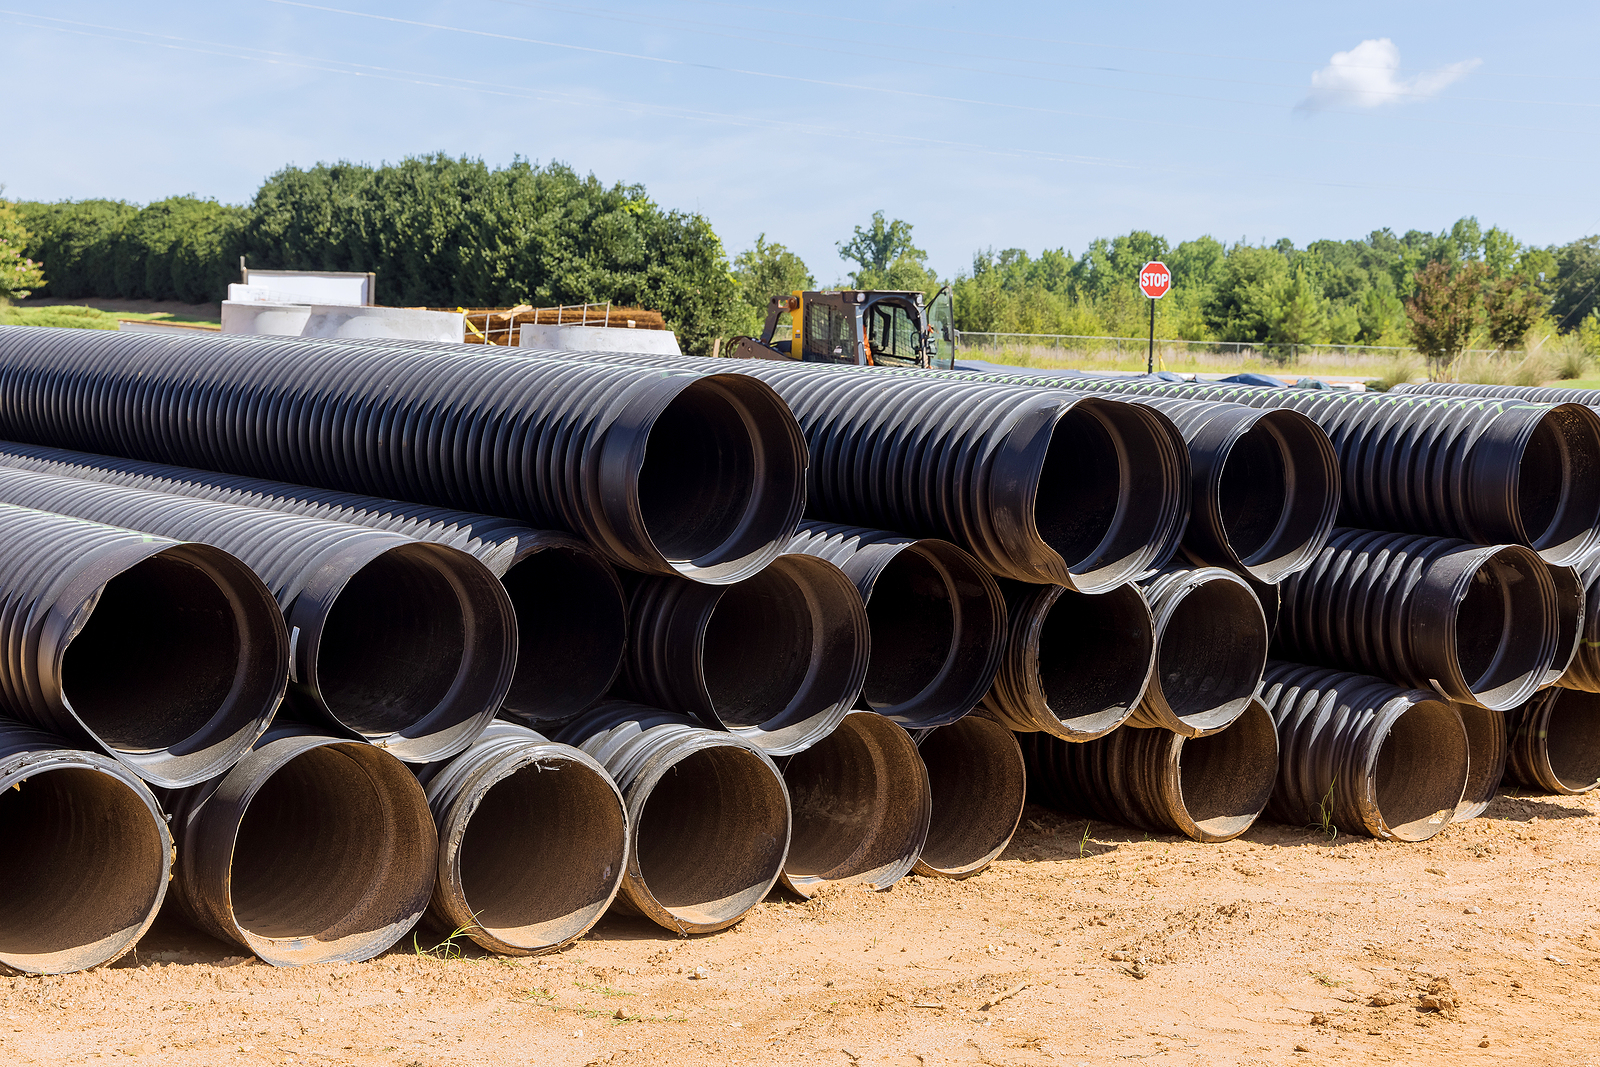 Construction Site, New Pvc Black Plastic Pipes Stacked In Rows A